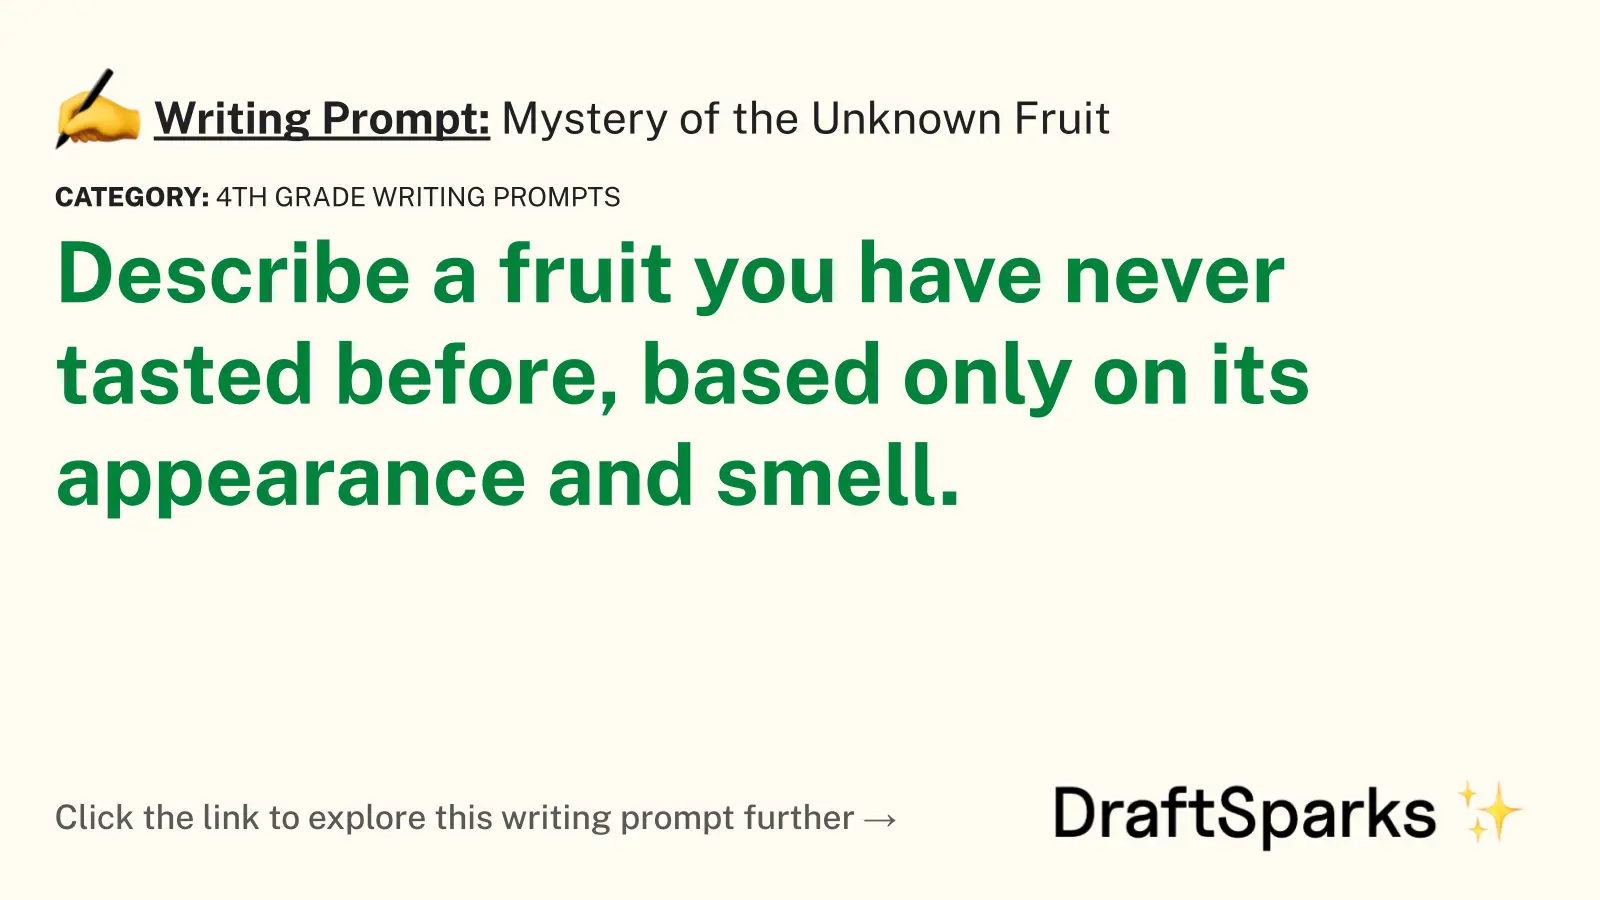 Mystery of the Unknown Fruit